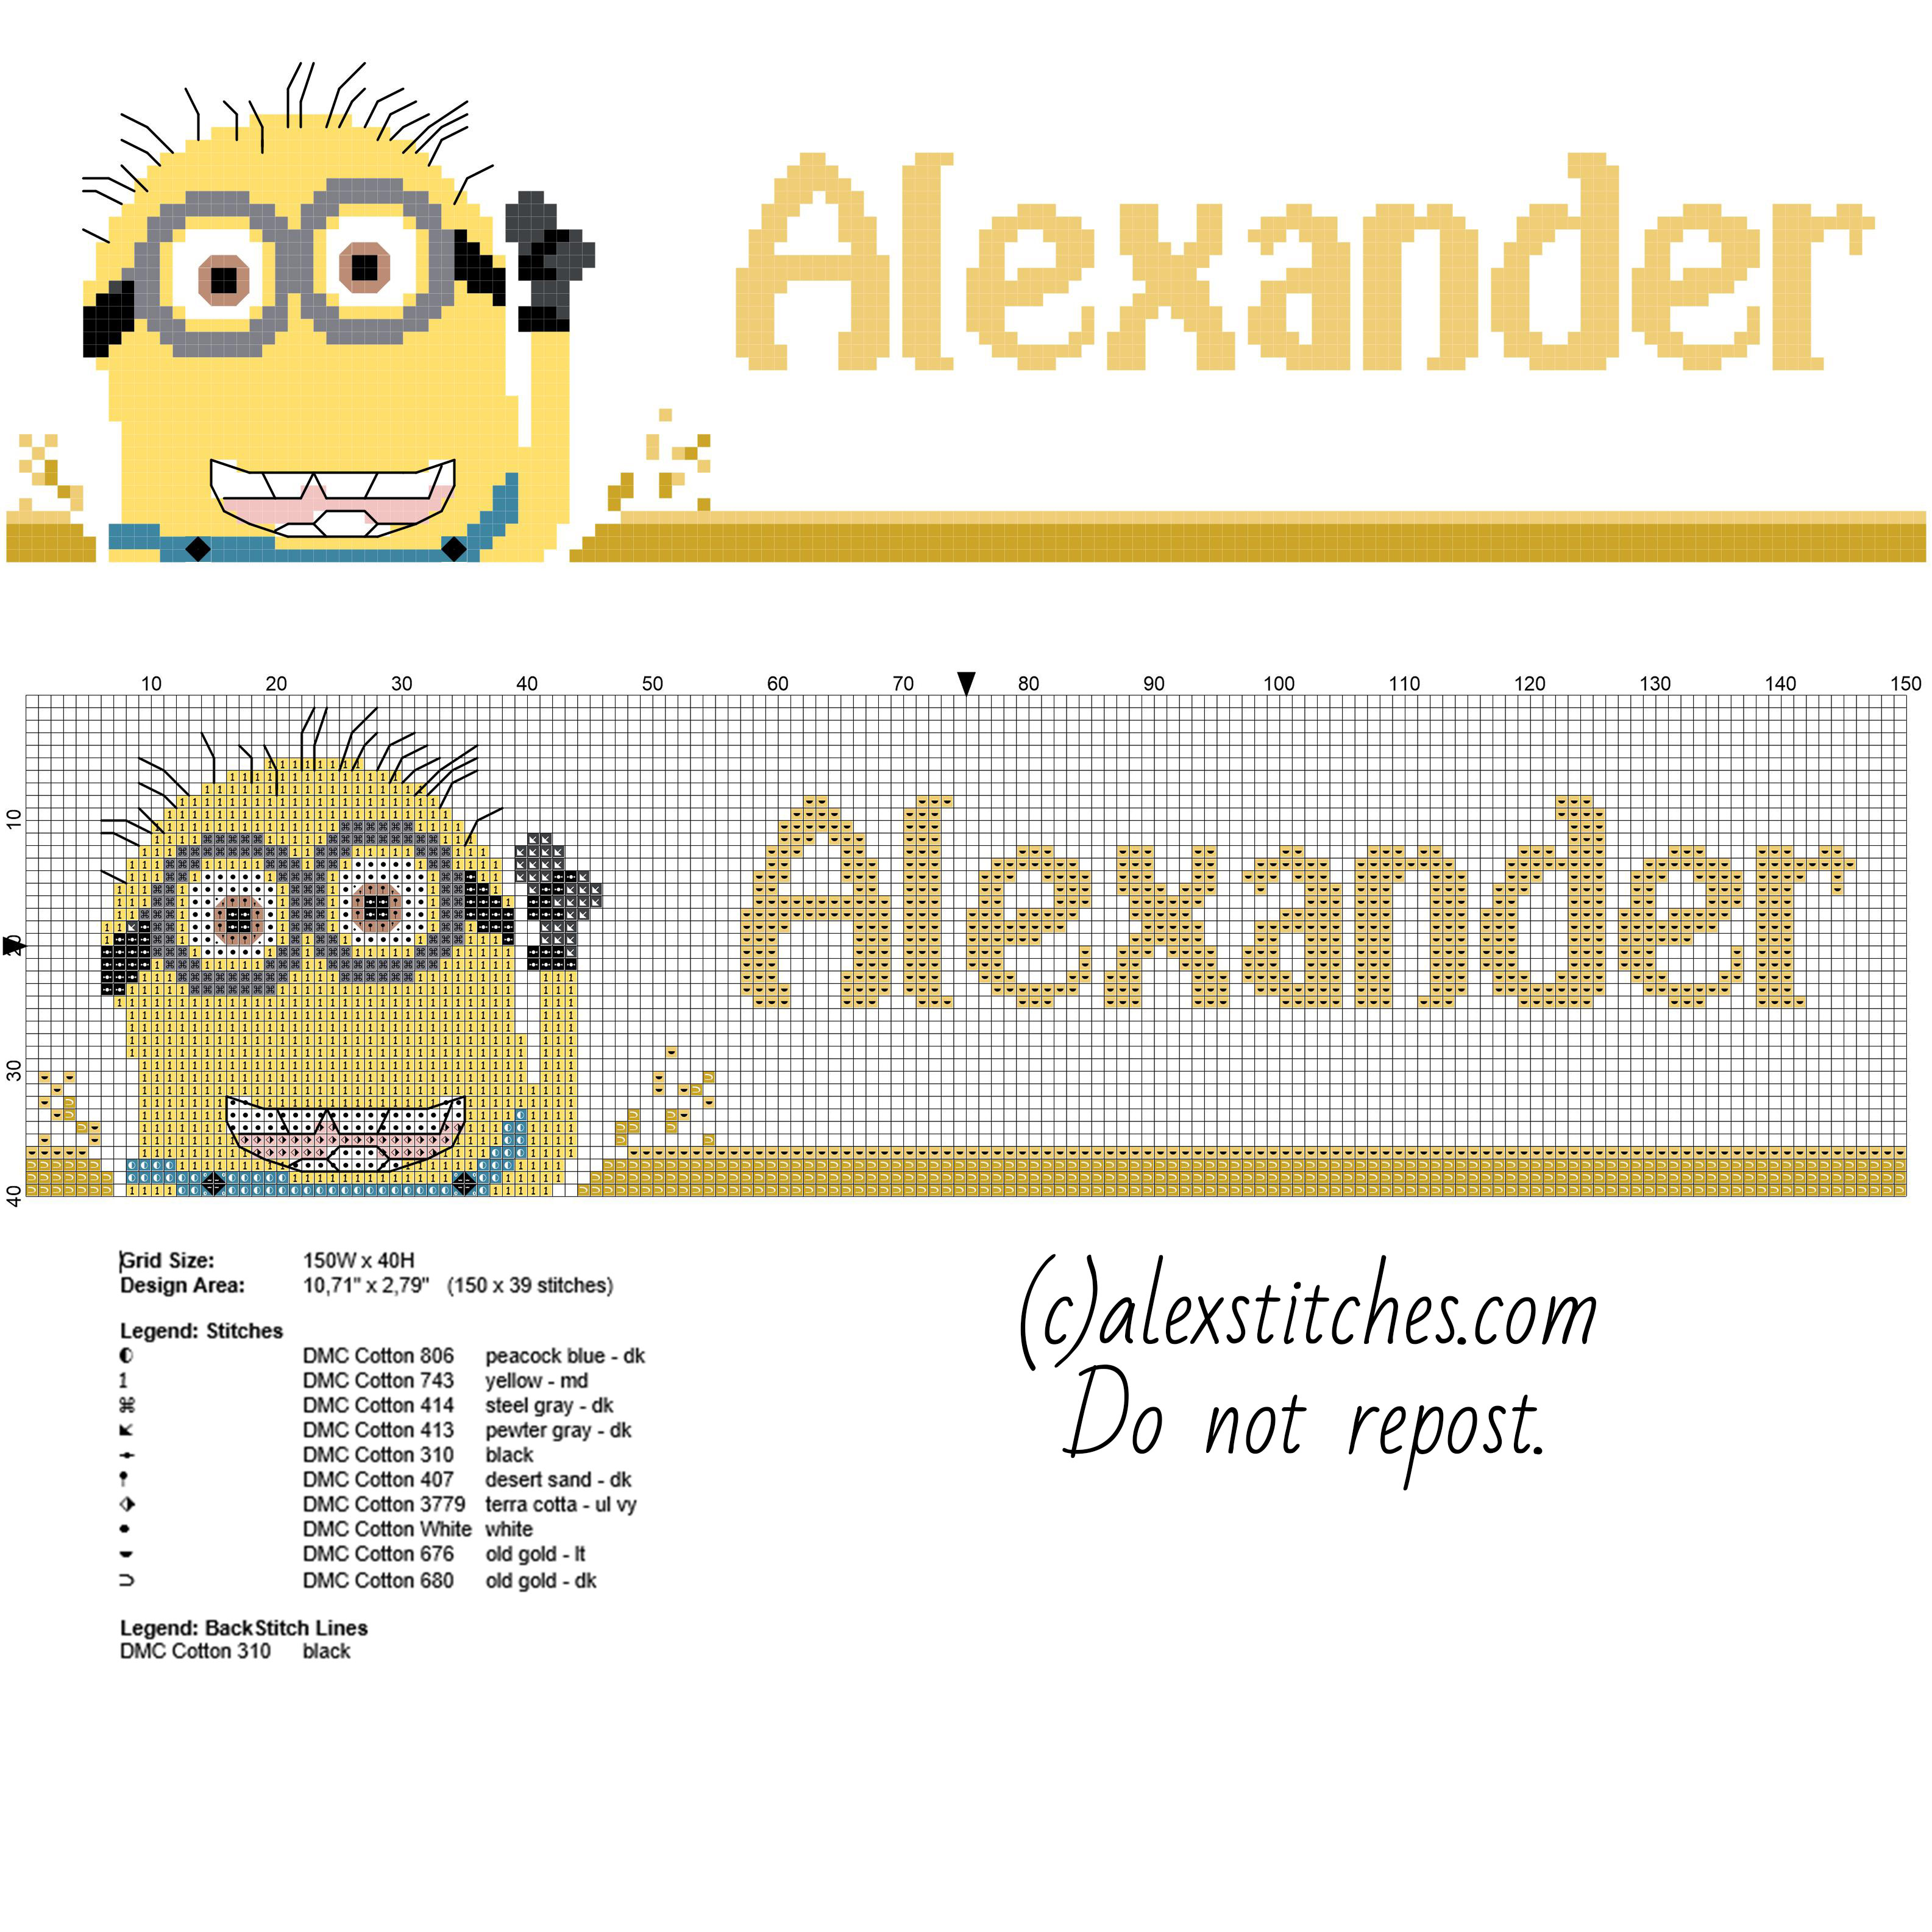 Name Alexander with Minion from Despicable Me movie free cross stitch pattern